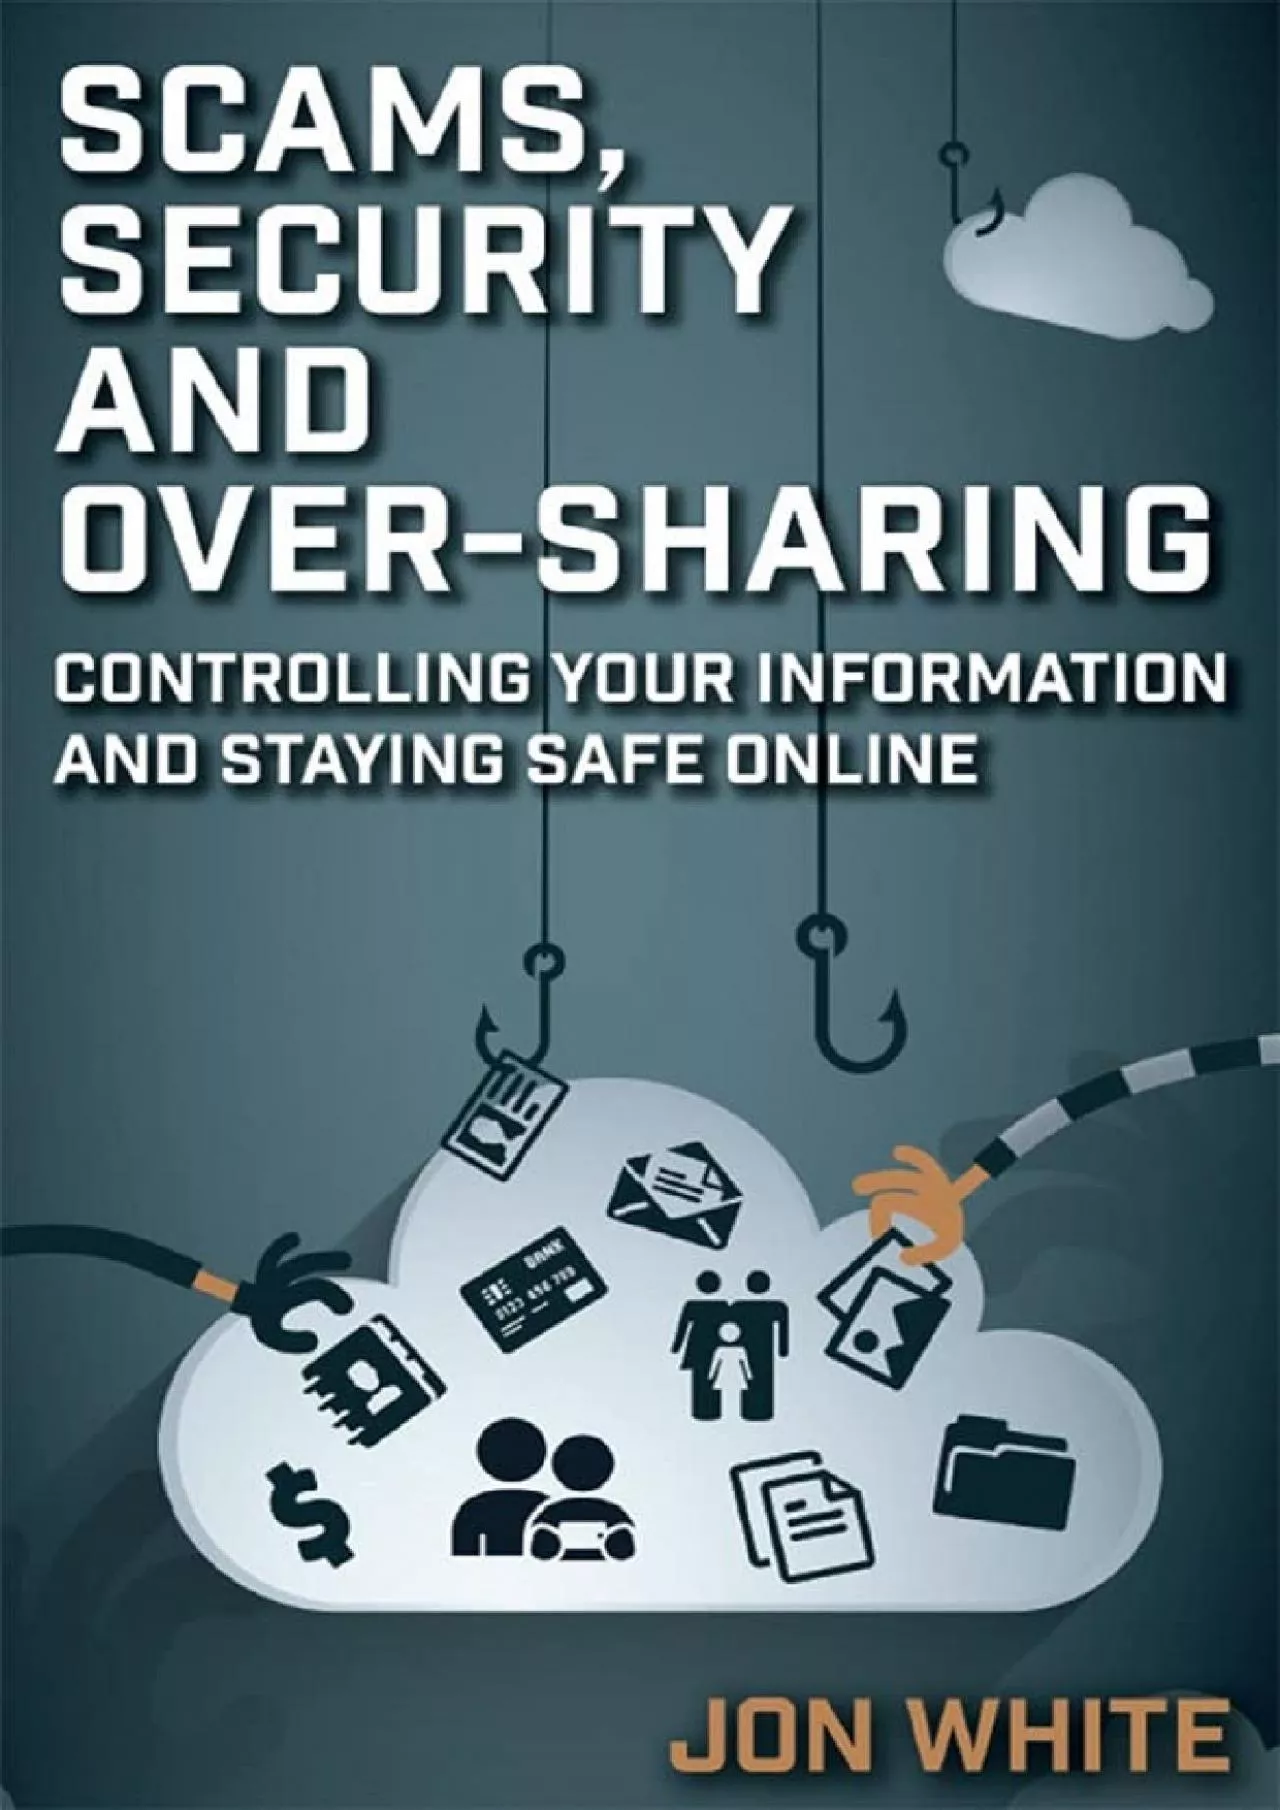 [BEST]-Scams, Security and Over-Sharing: Controlling your information and staying safe